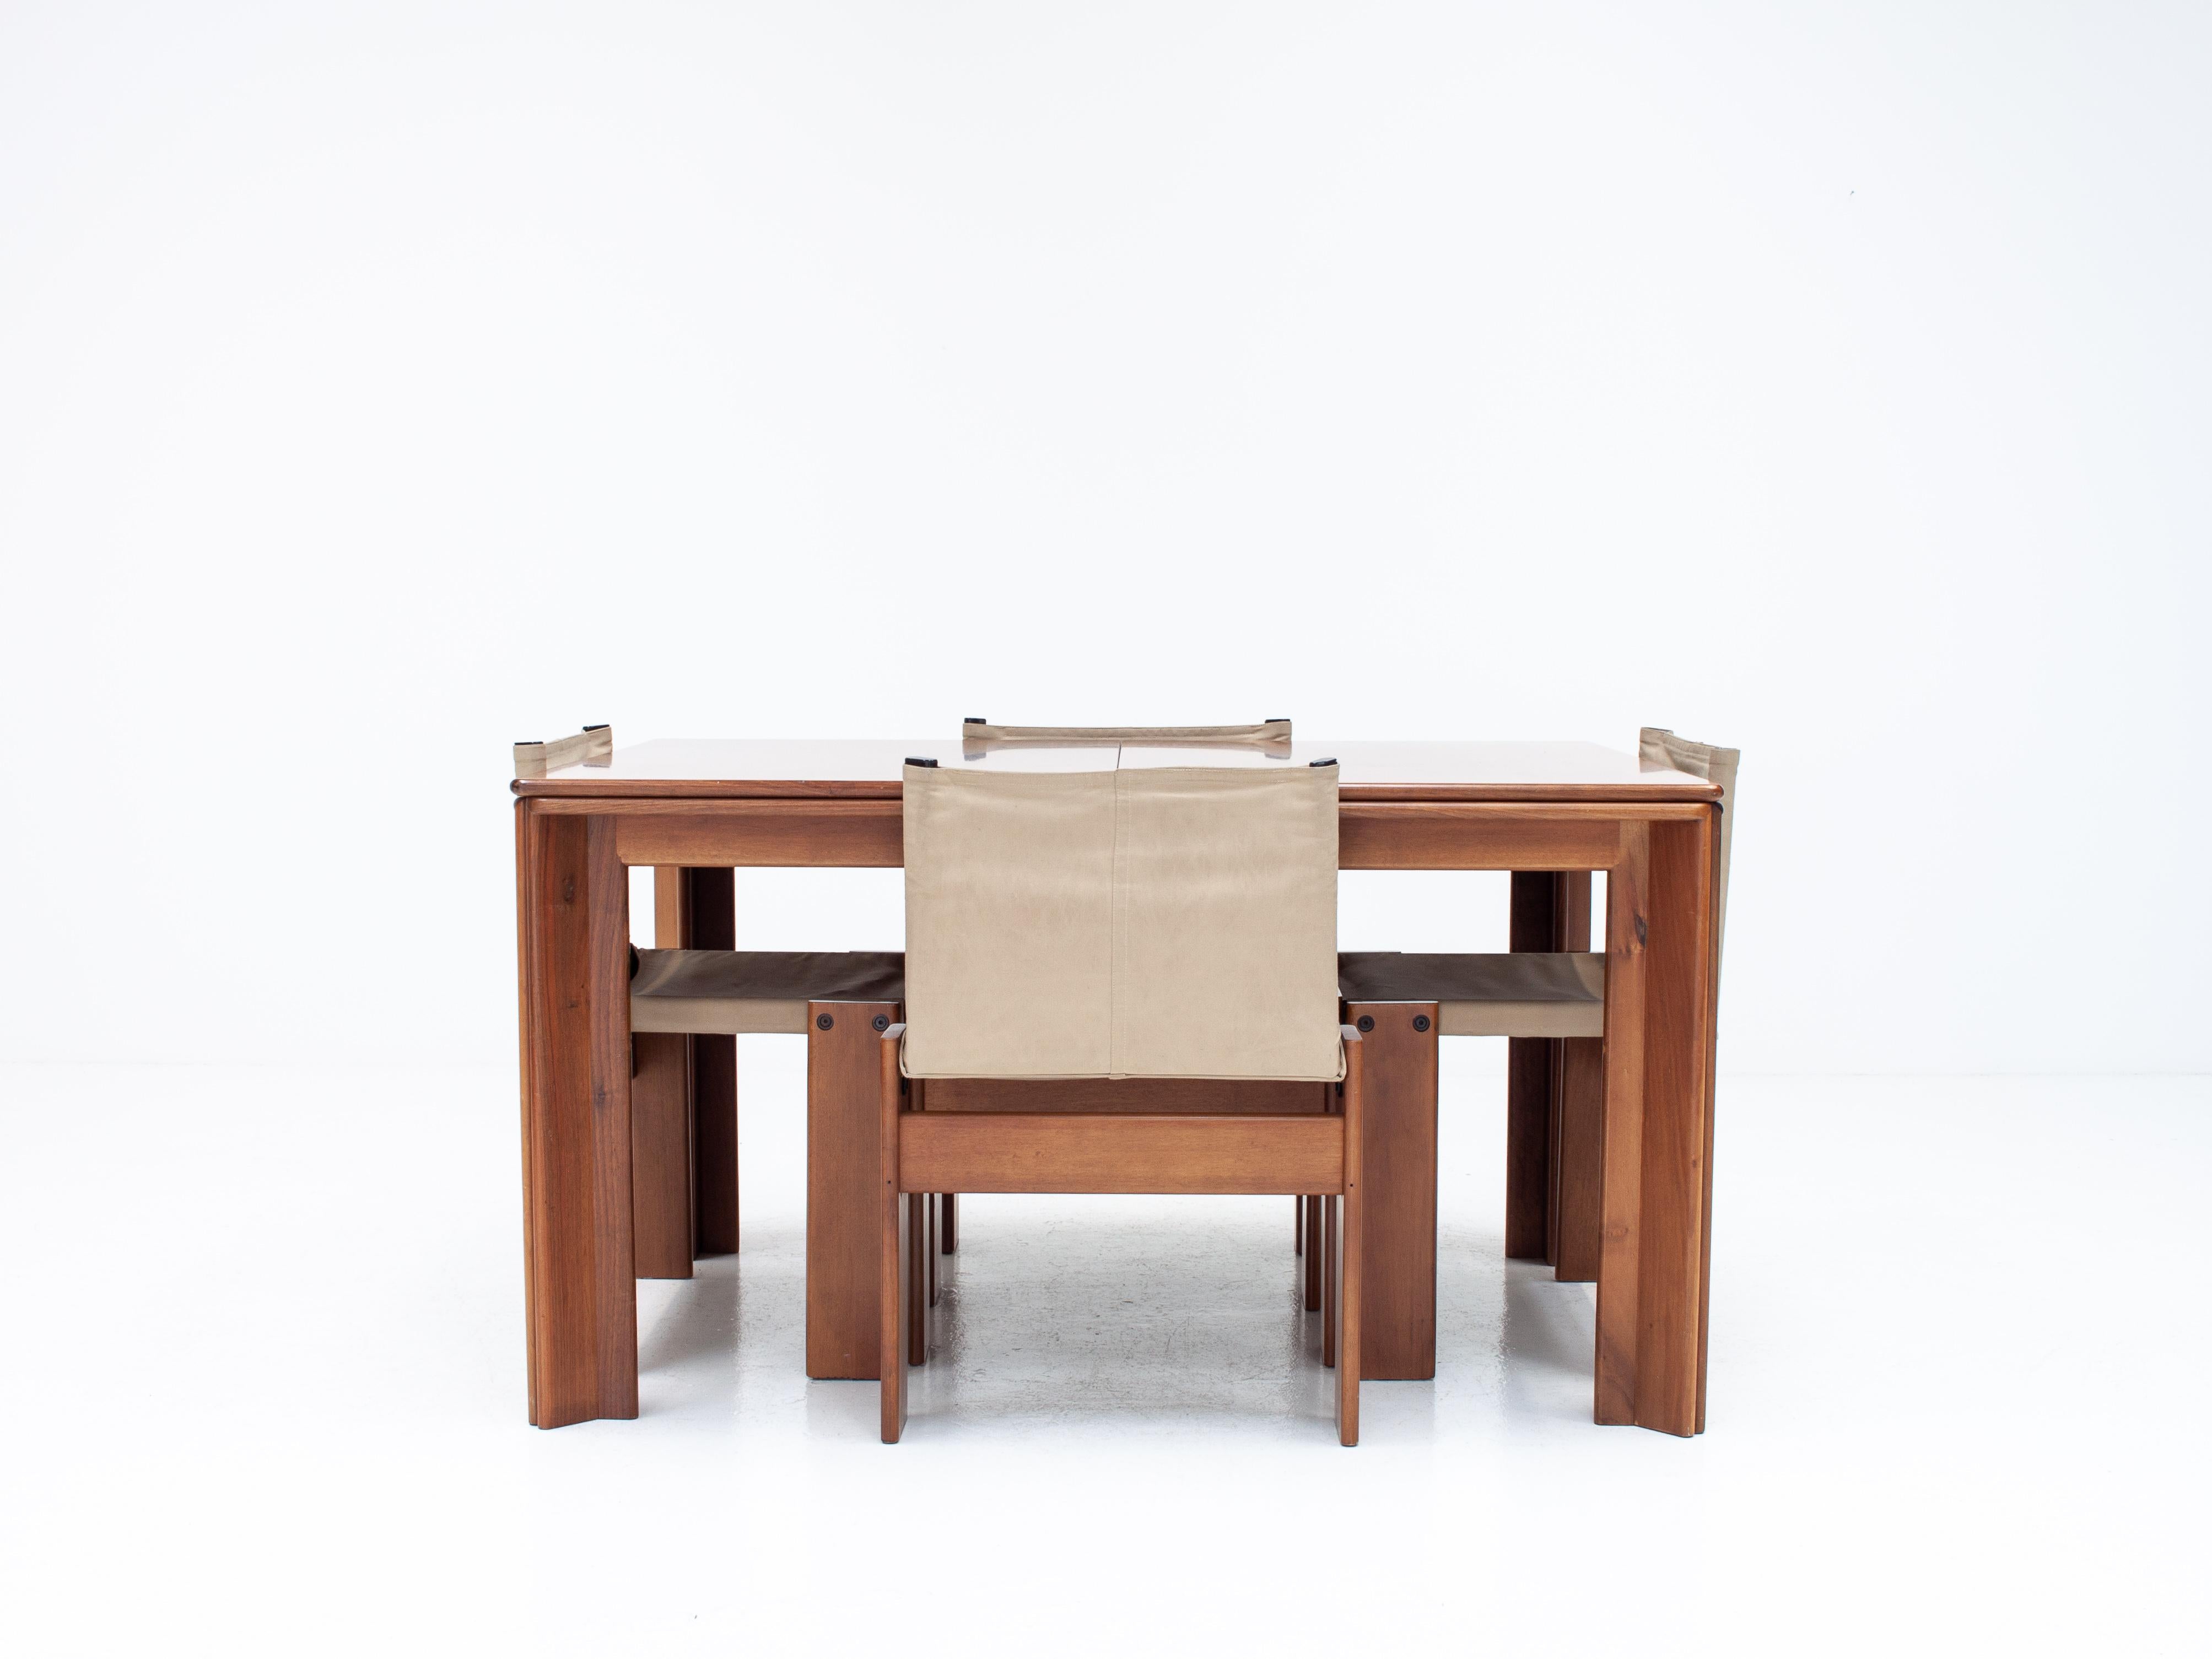 Afra & Tobia Scarpa 'Monk' Dining Chairs & Table for Molteni, Italy, 1974 1